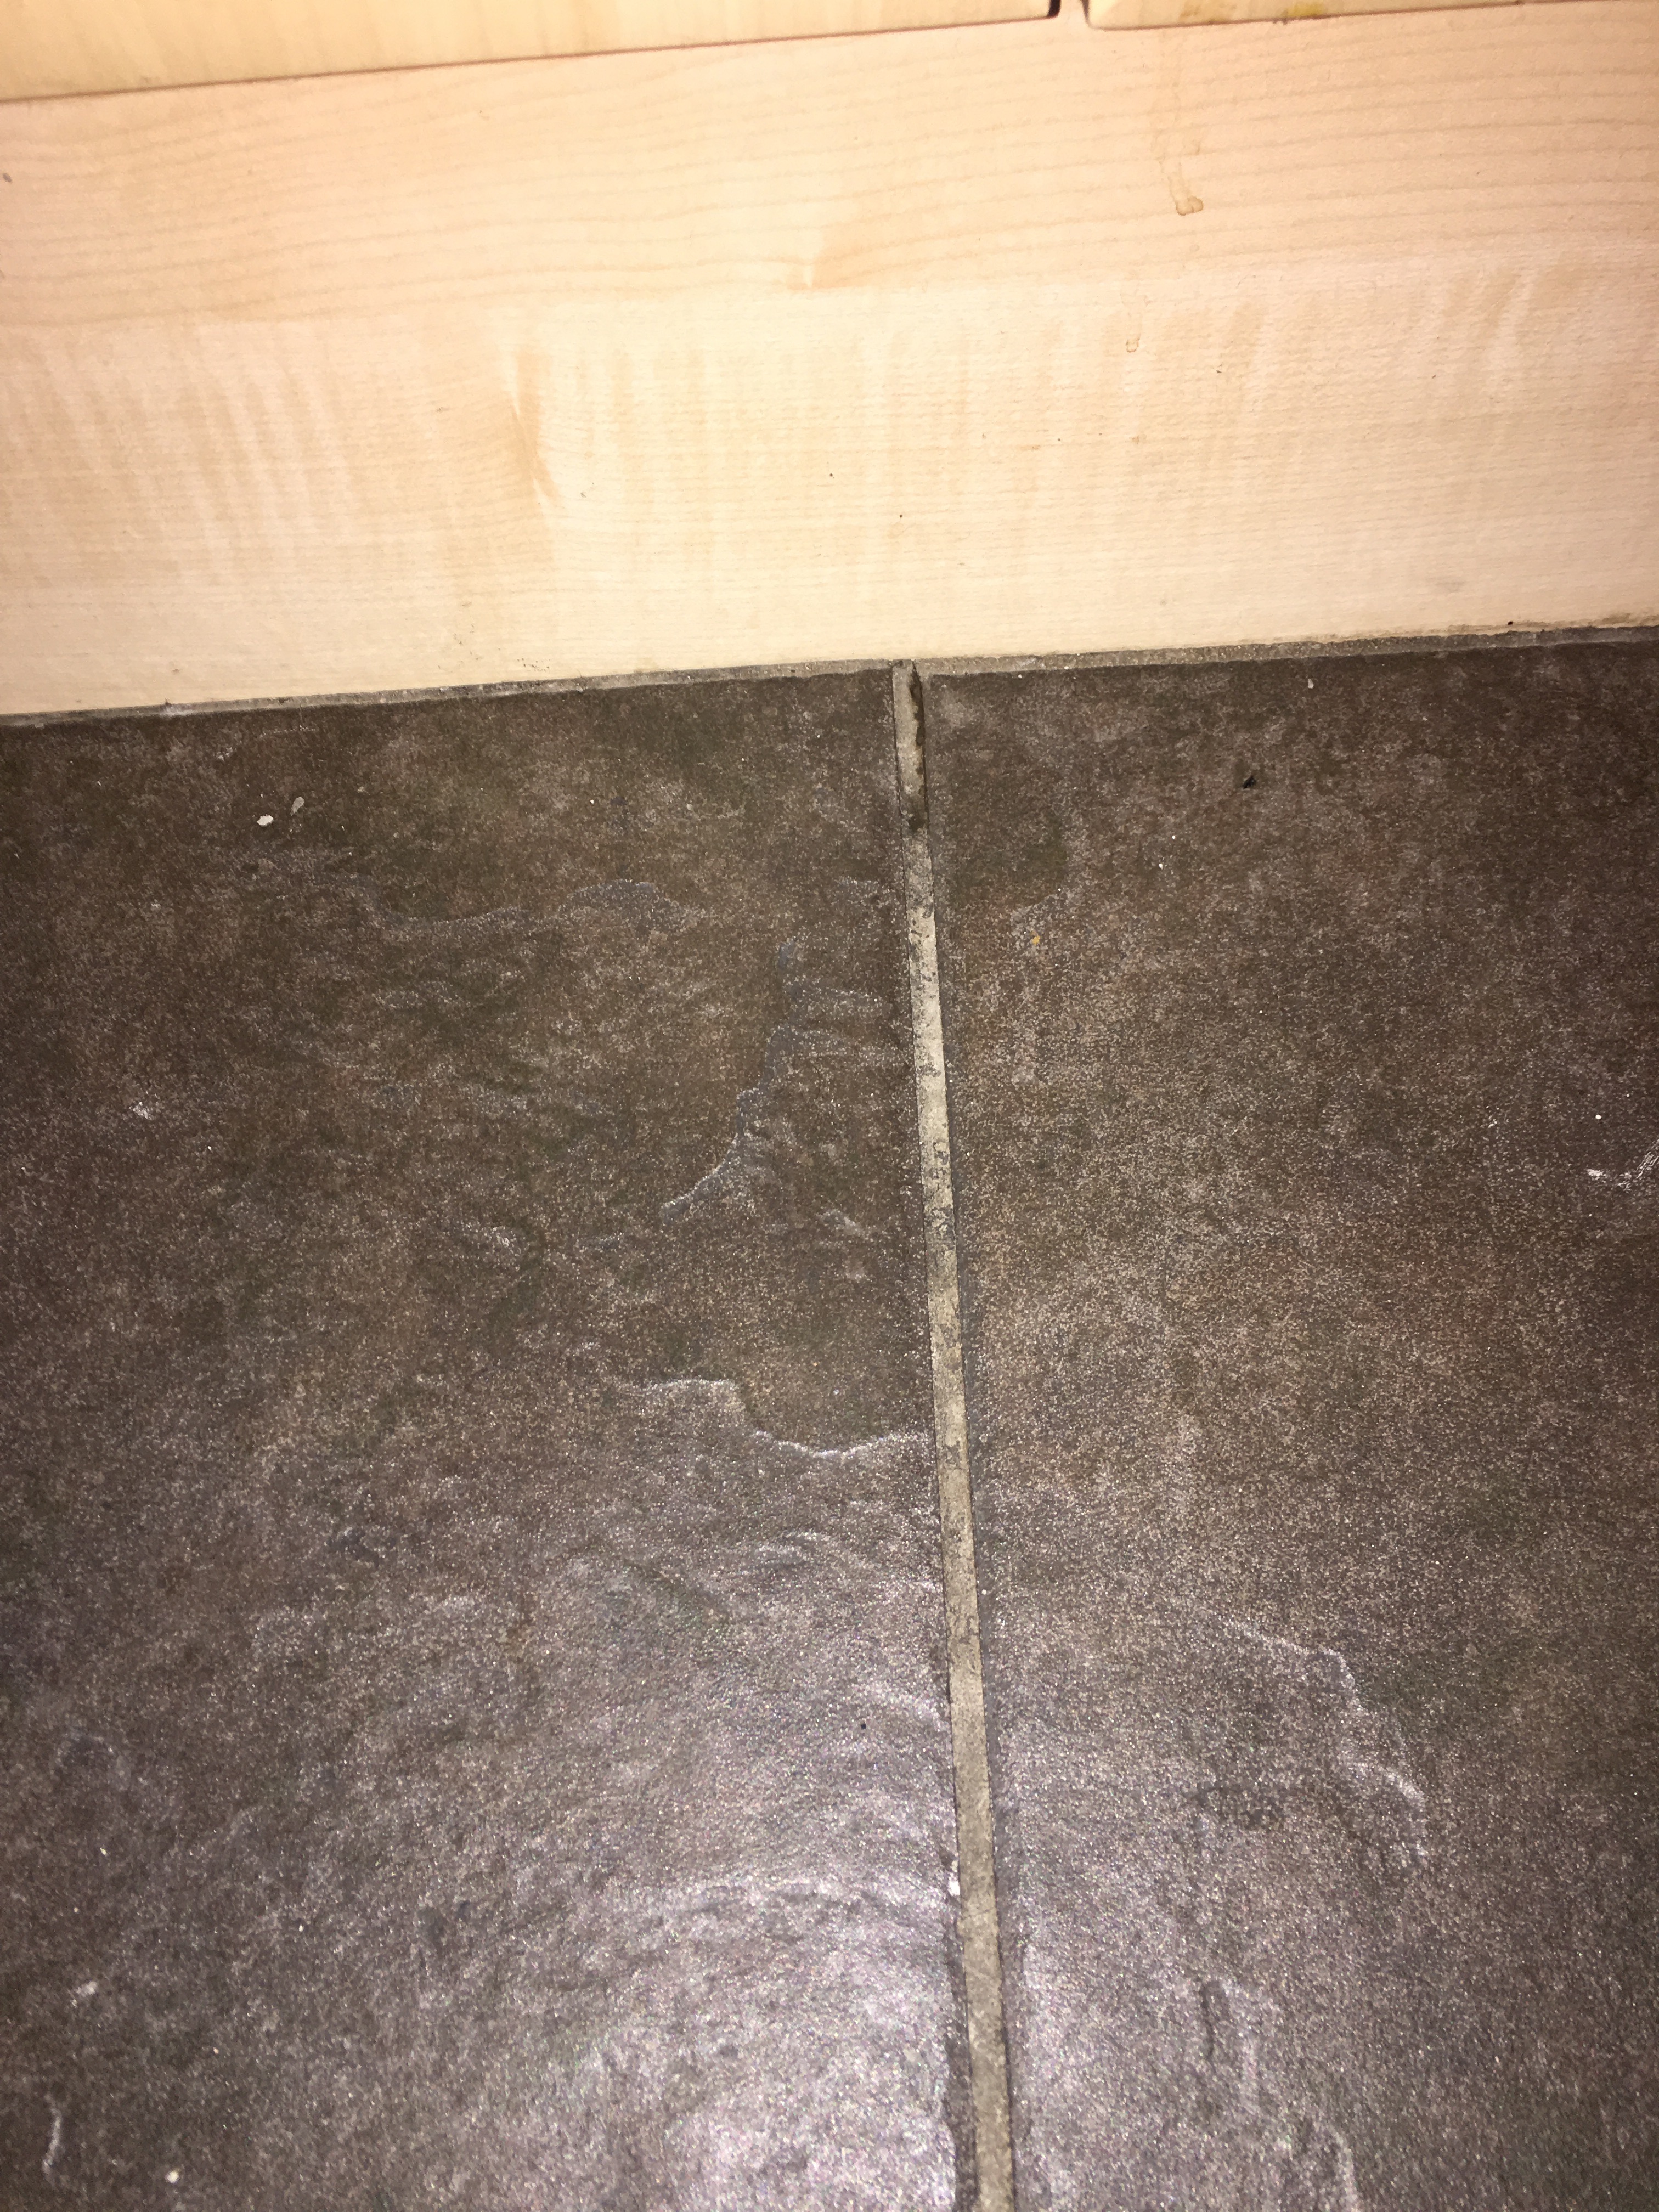 Water stain between tiles 2 and 3